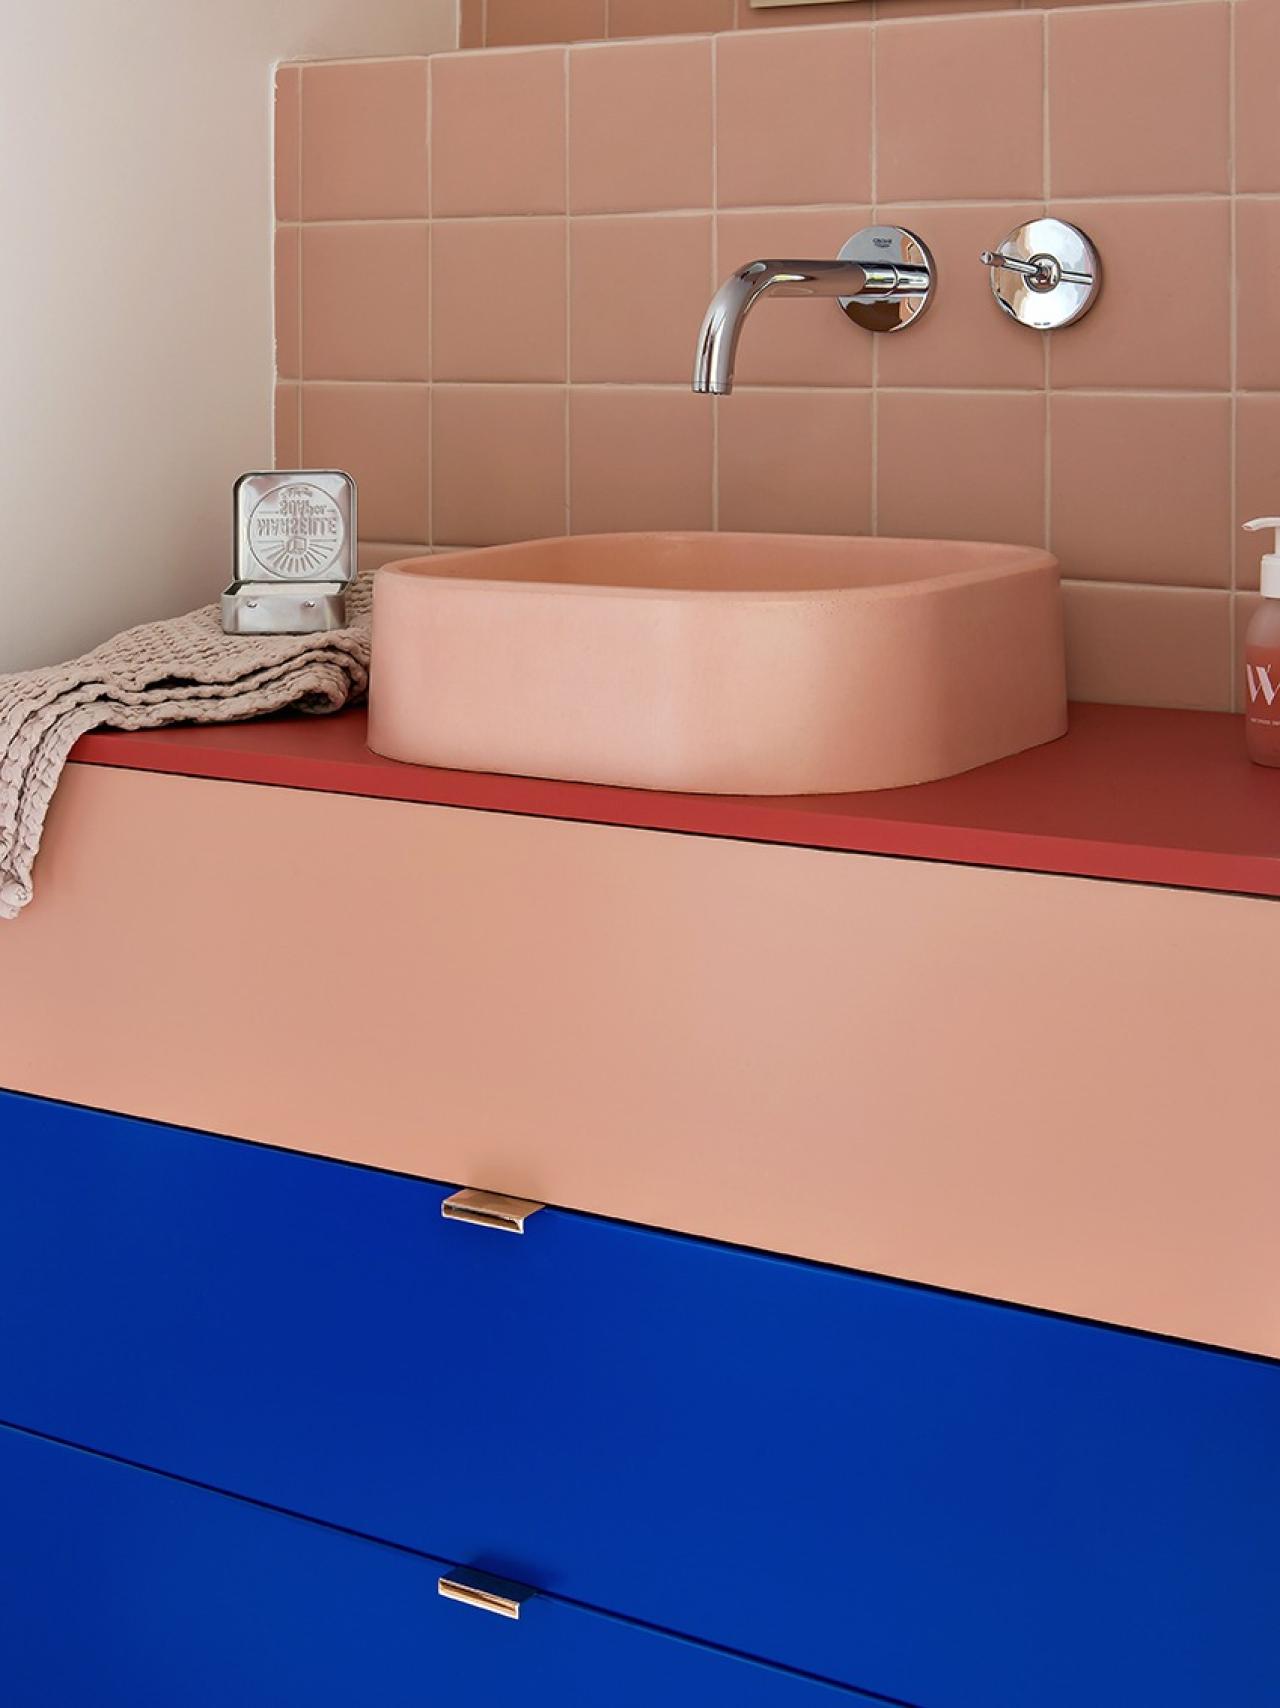 A pop bathroom unit in Electric blue and Blush pink 